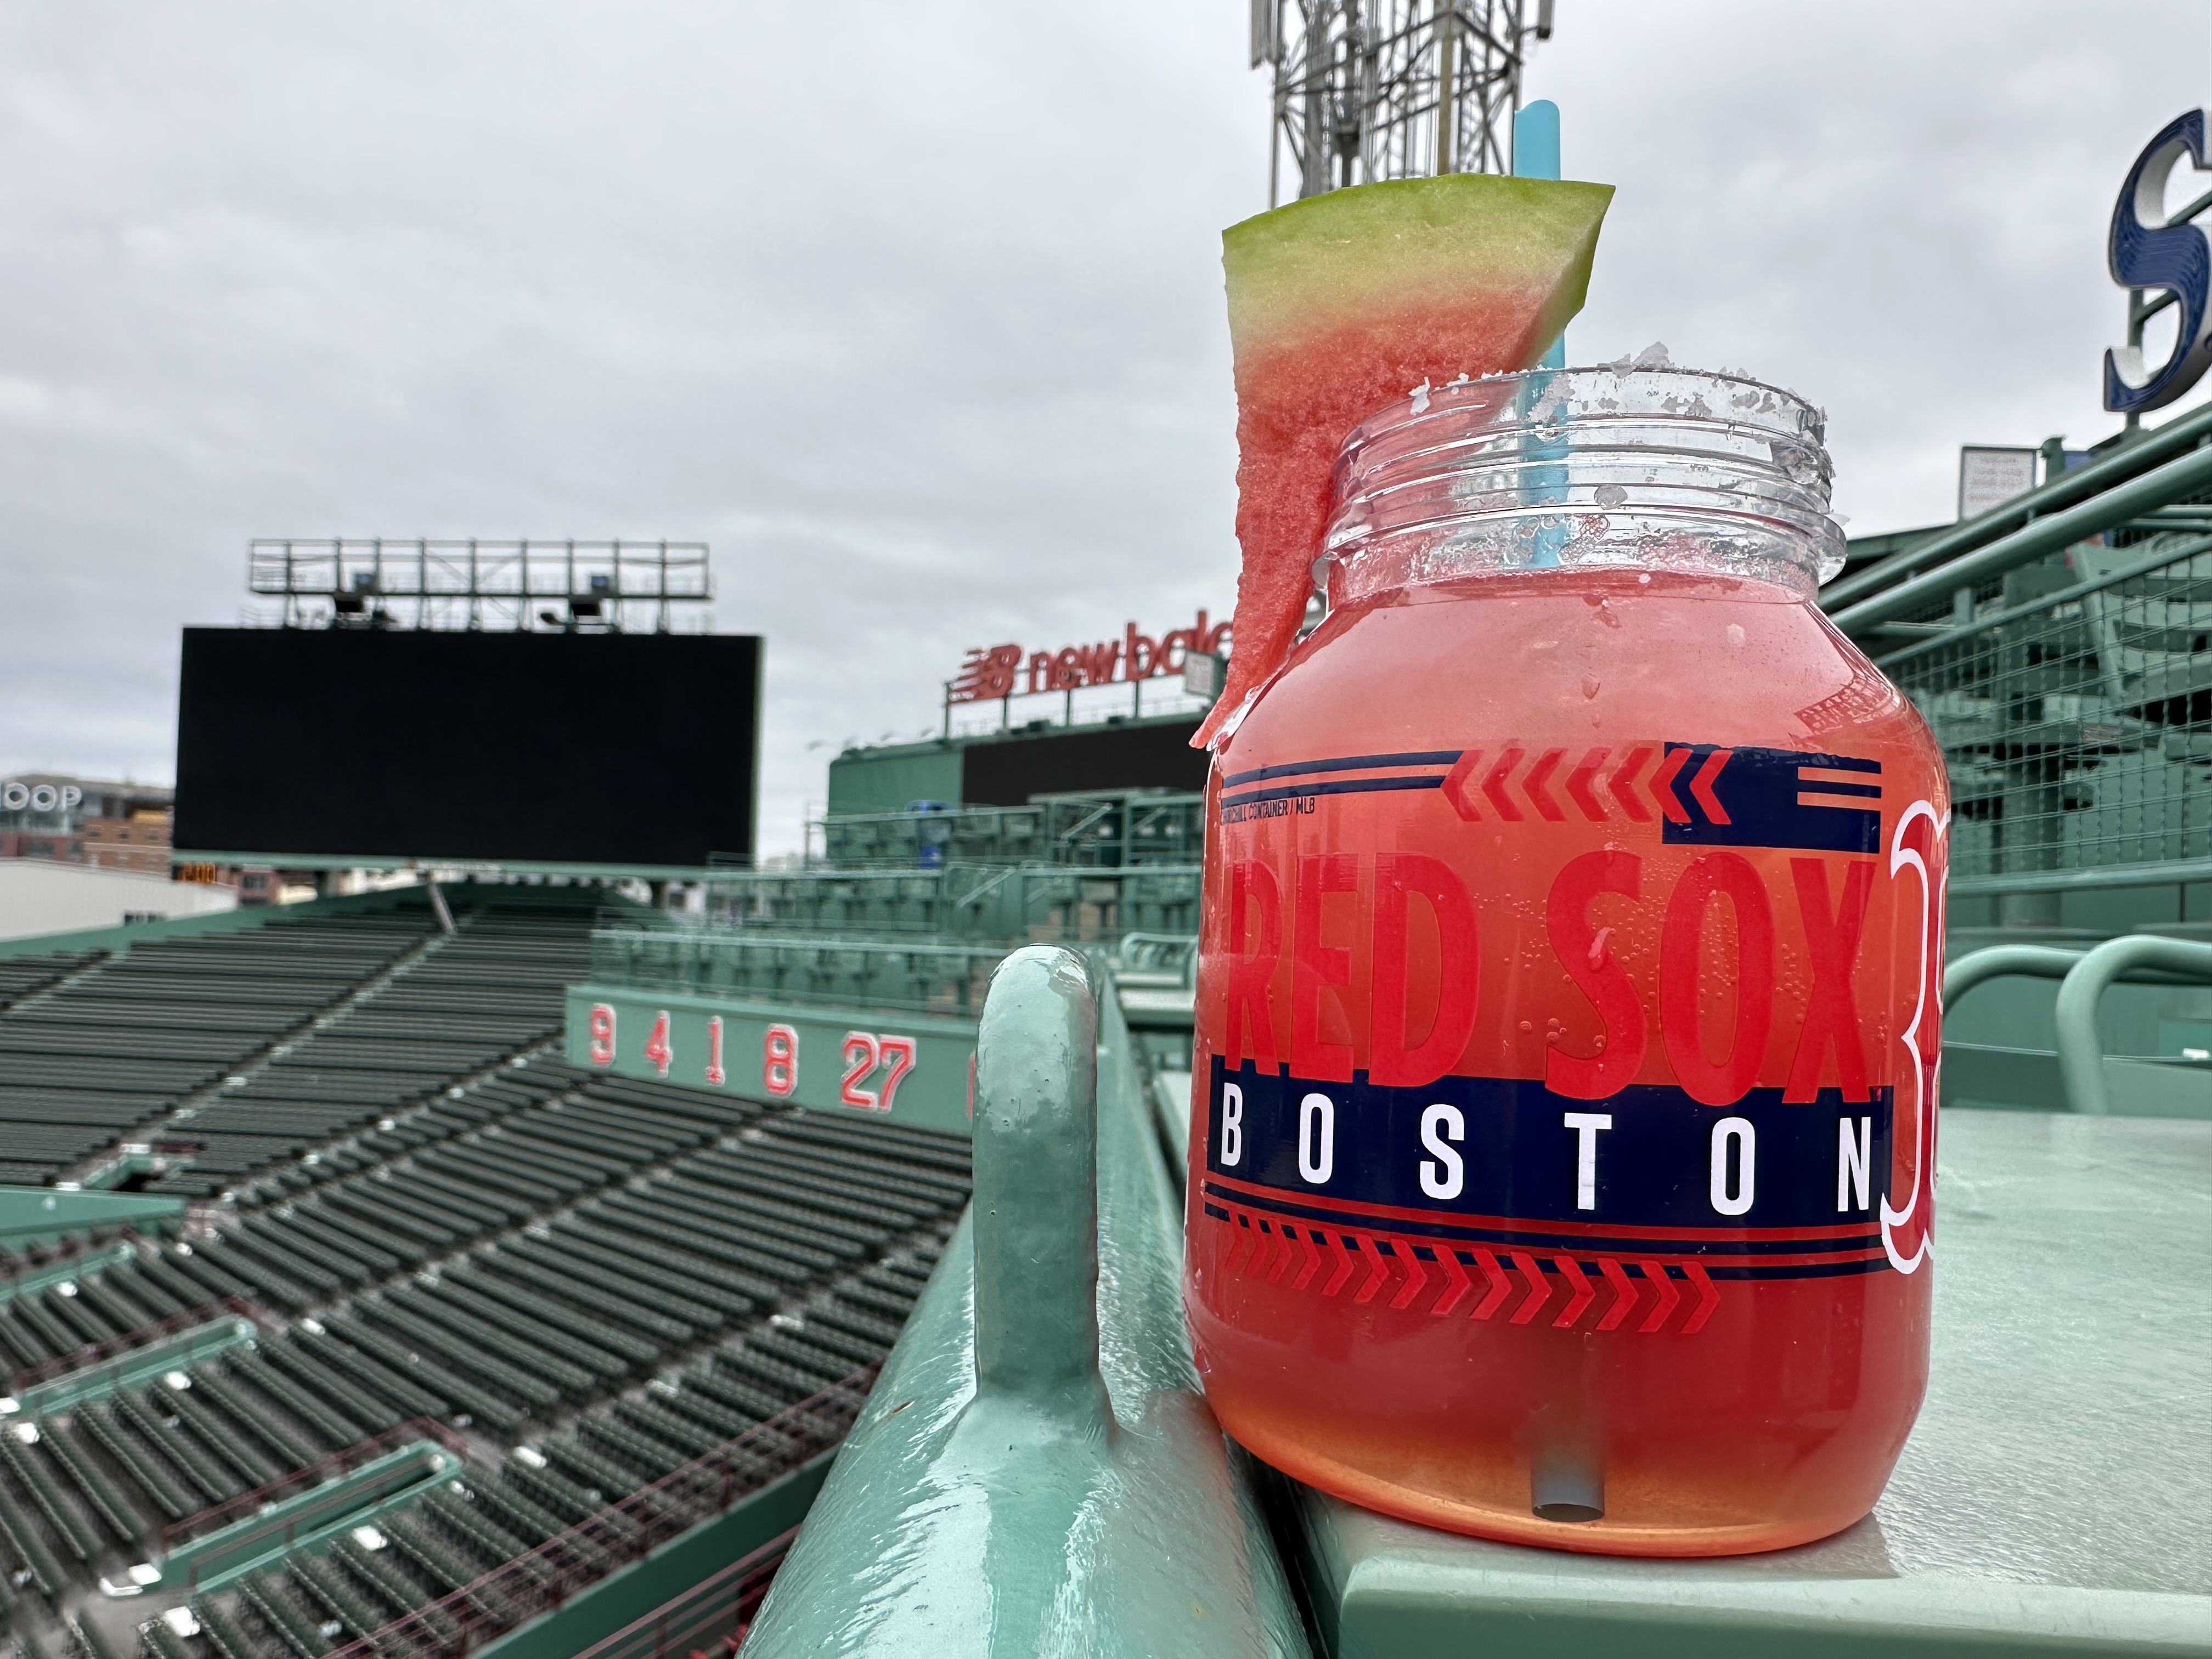 Check out this new little feature at Fenway Park this season! #redsox , Fenway Park